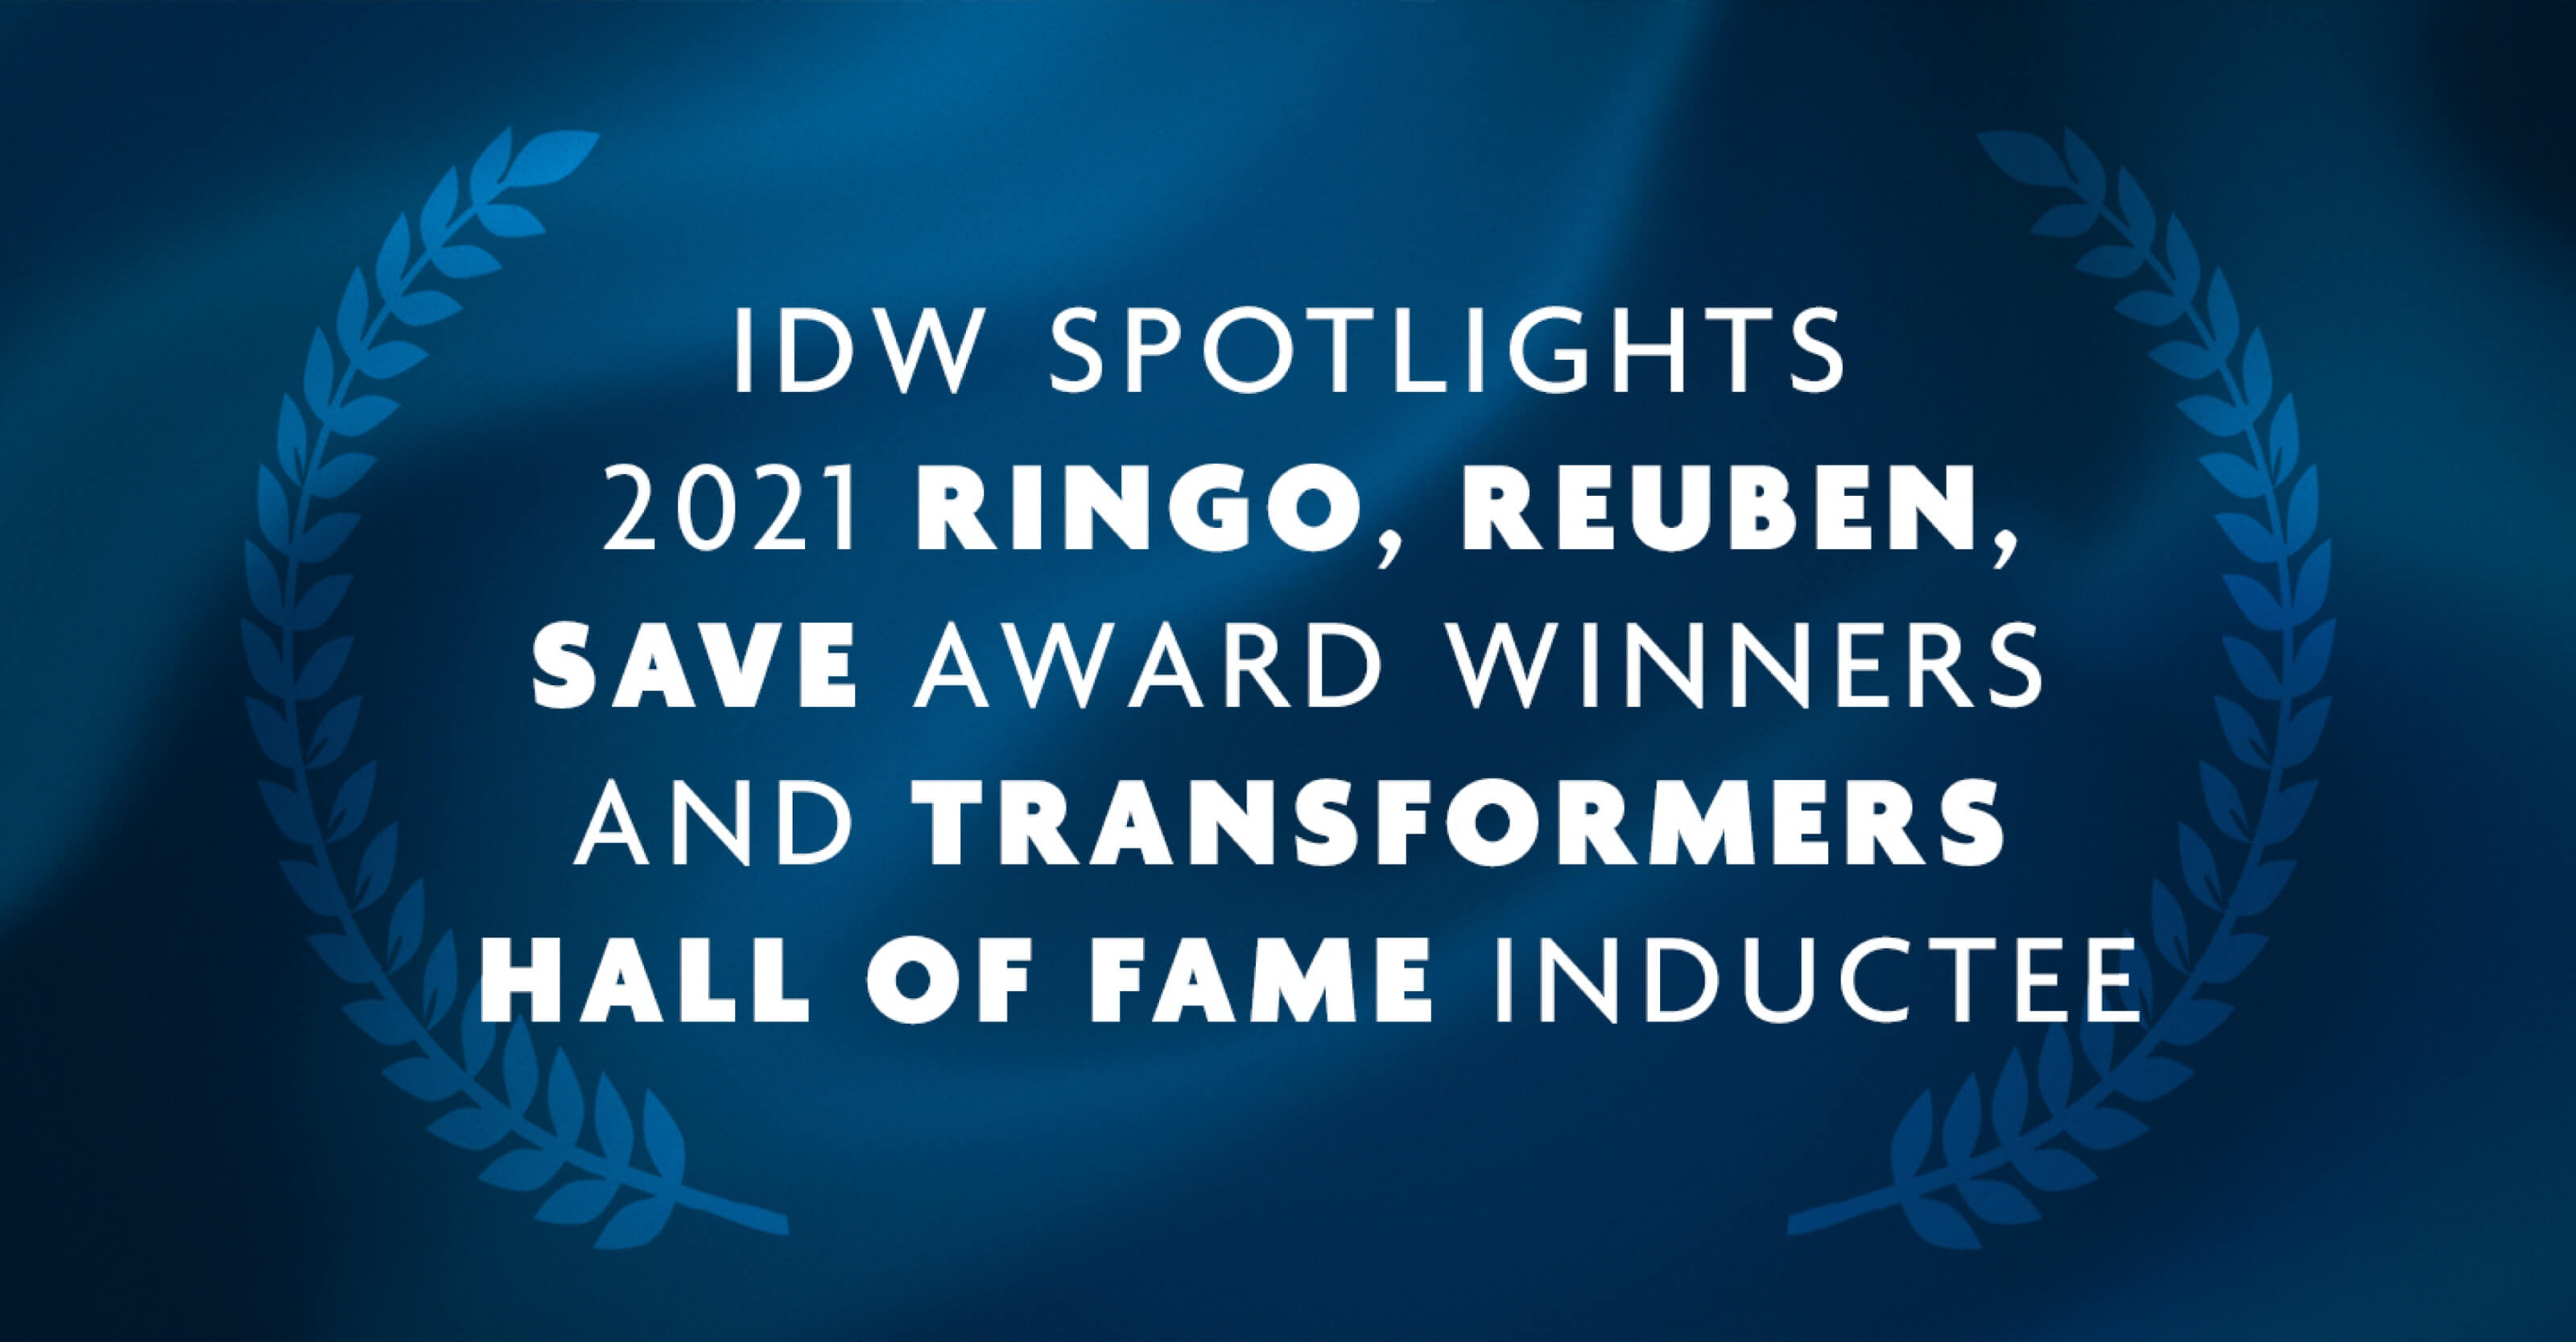 IDW Spotlights Ringo, Reuben, SAVE Award Winners and Transformers Hall of Fame Inductee